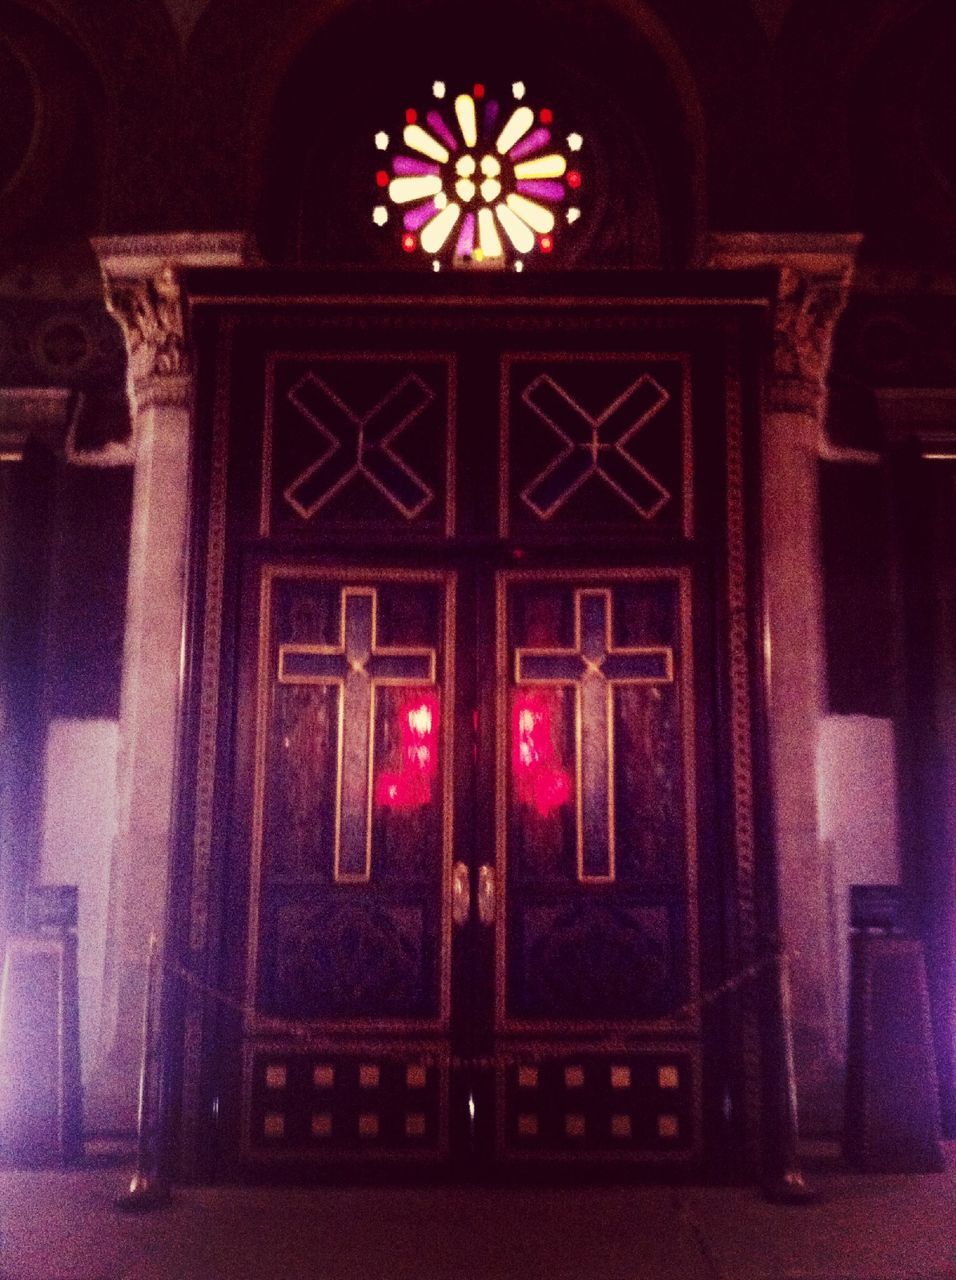 religion, place of worship, spirituality, church, illuminated, architecture, red, built structure, indoors, building exterior, ornate, door, decoration, entrance, night, window, temple - building, cathedral